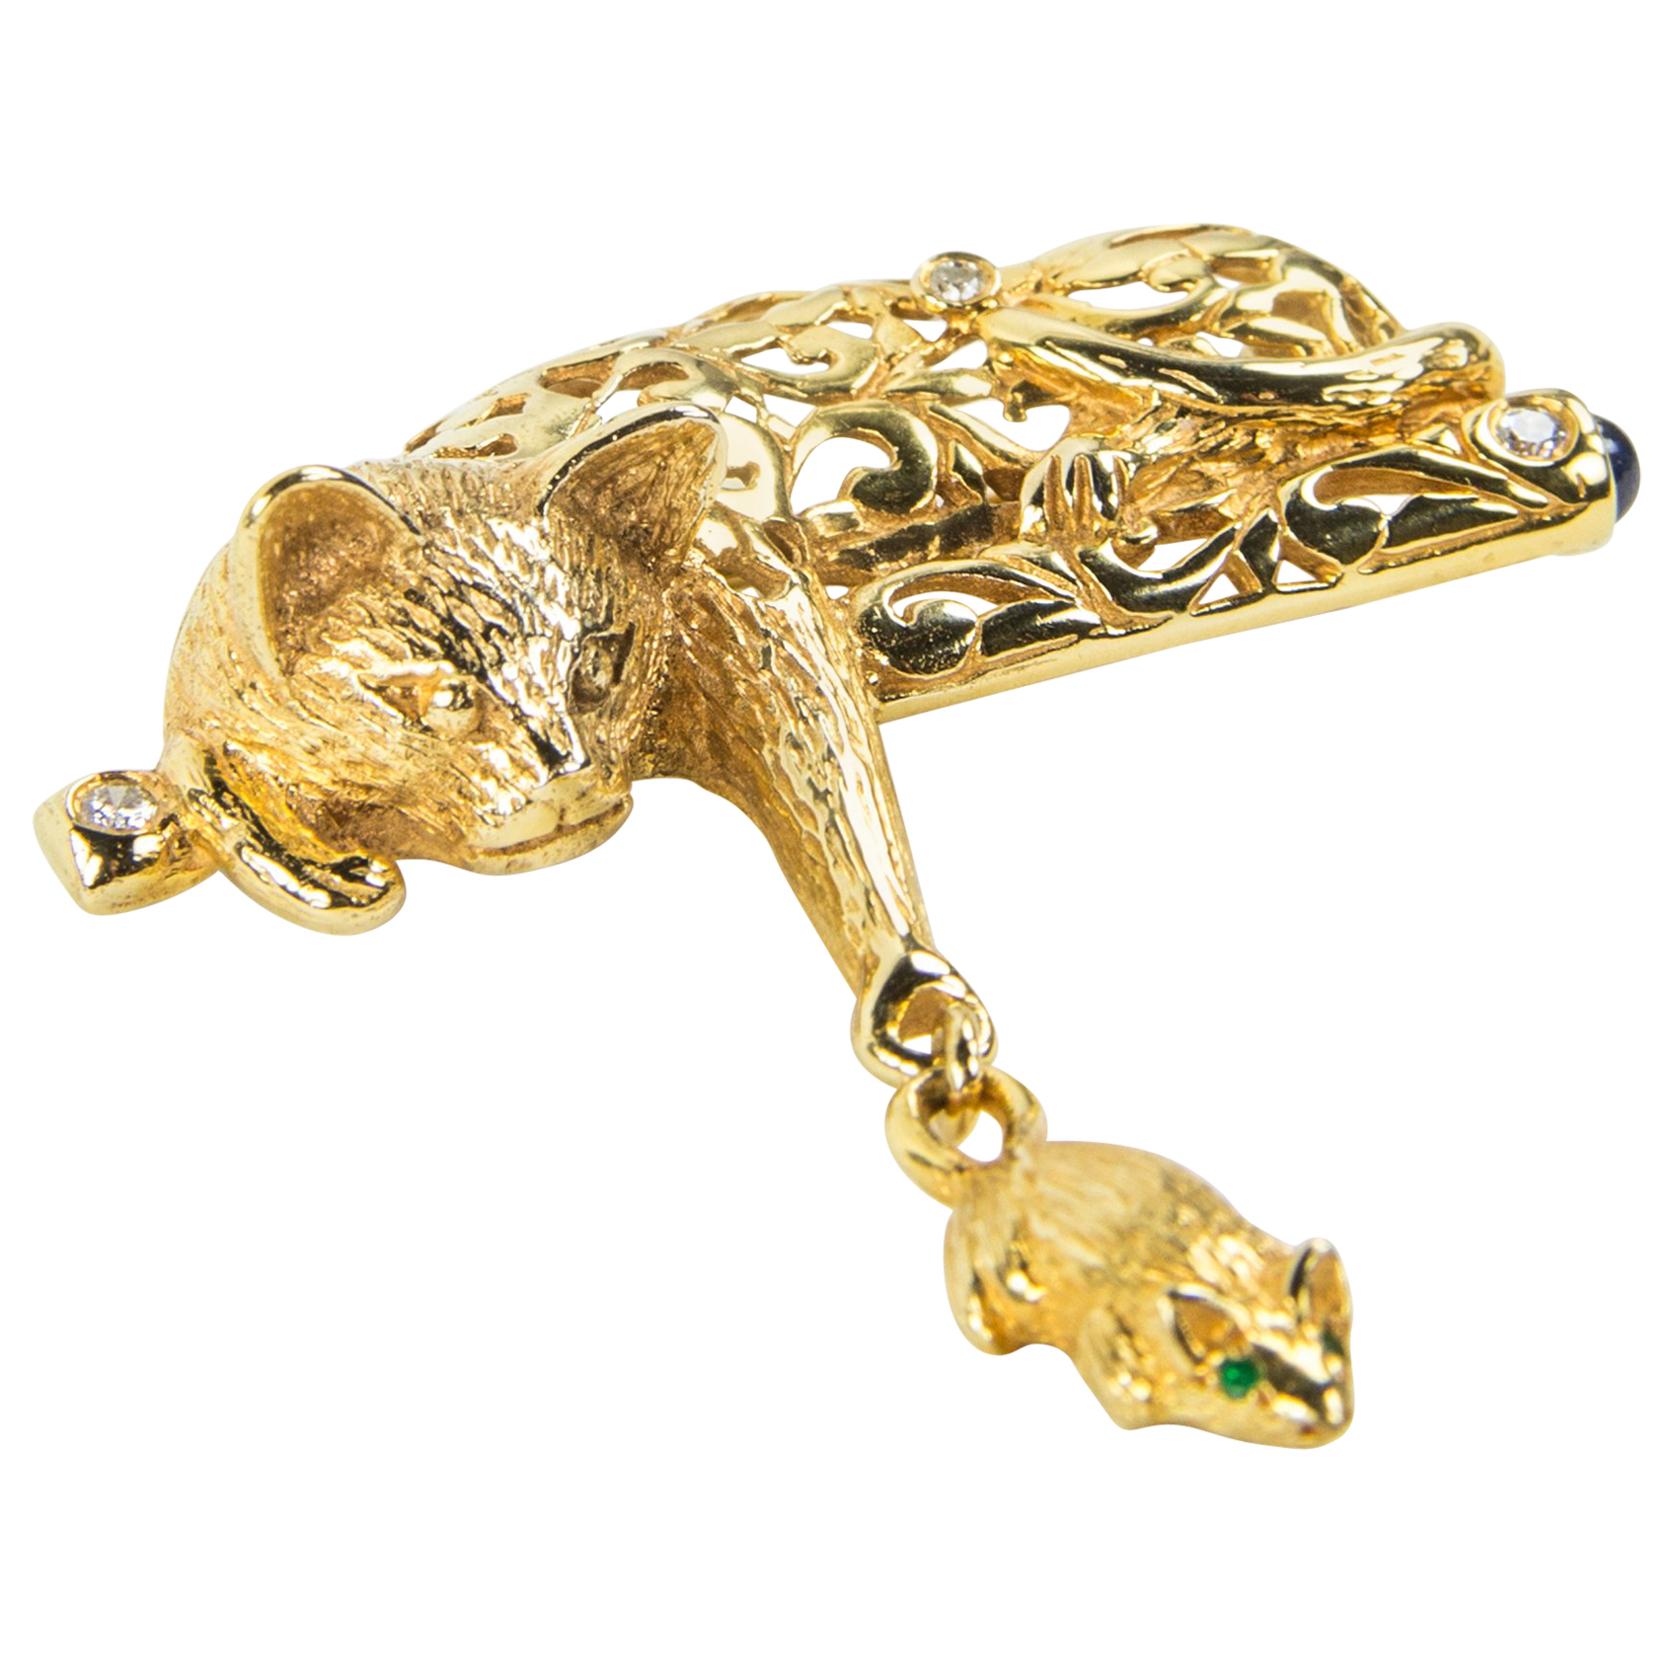 Whimsical Cat and Mouse Gold Brooch Pin Estate Fine Jewelry